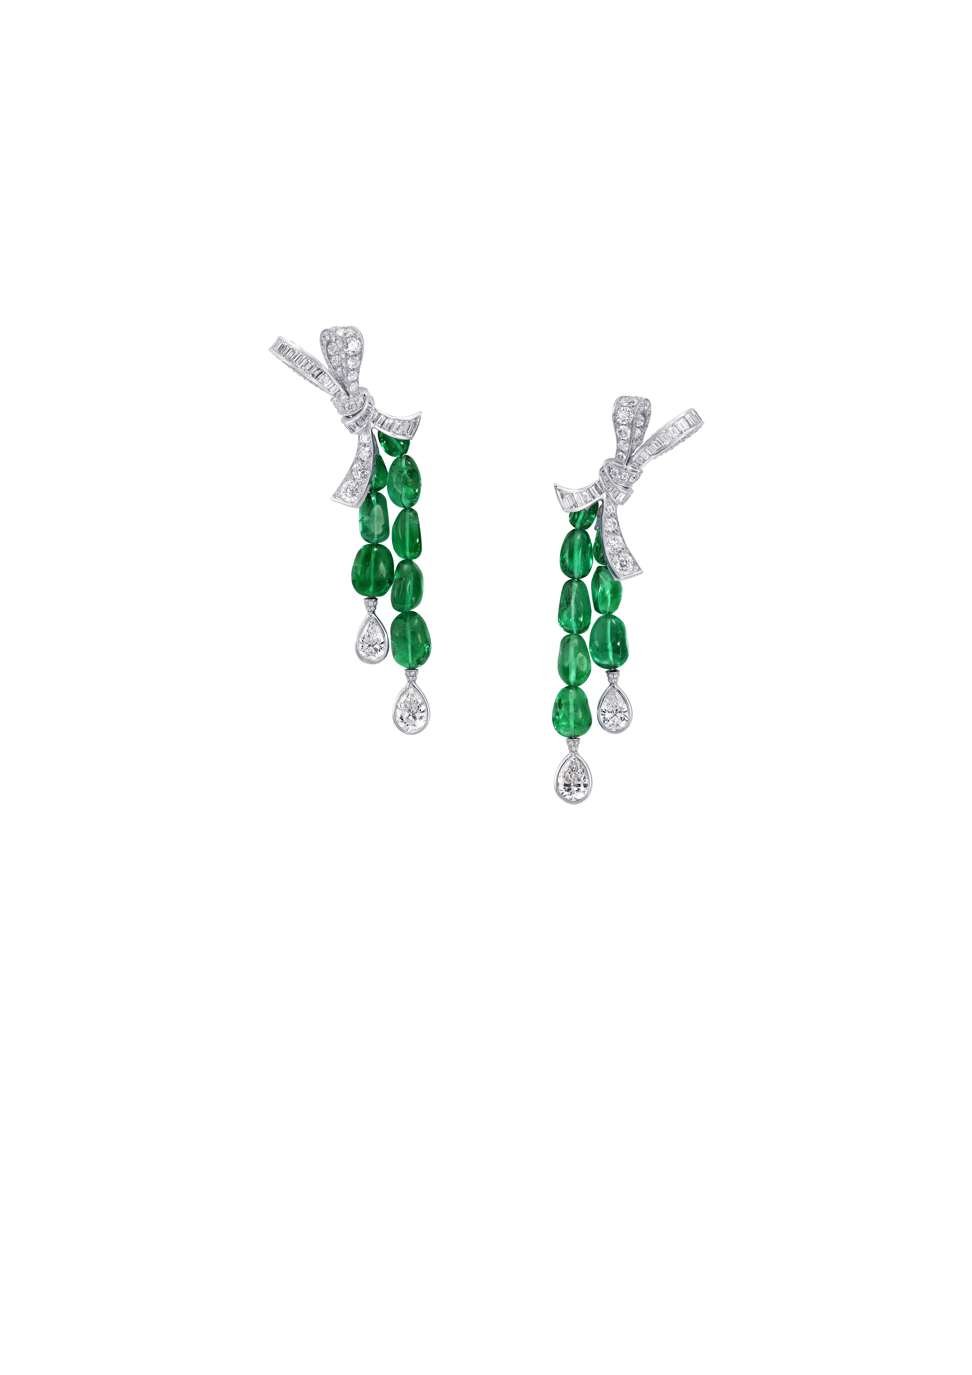 As part of the bow collection, this pair of multishape emerald and diamond earrings twinkles with green light as you move